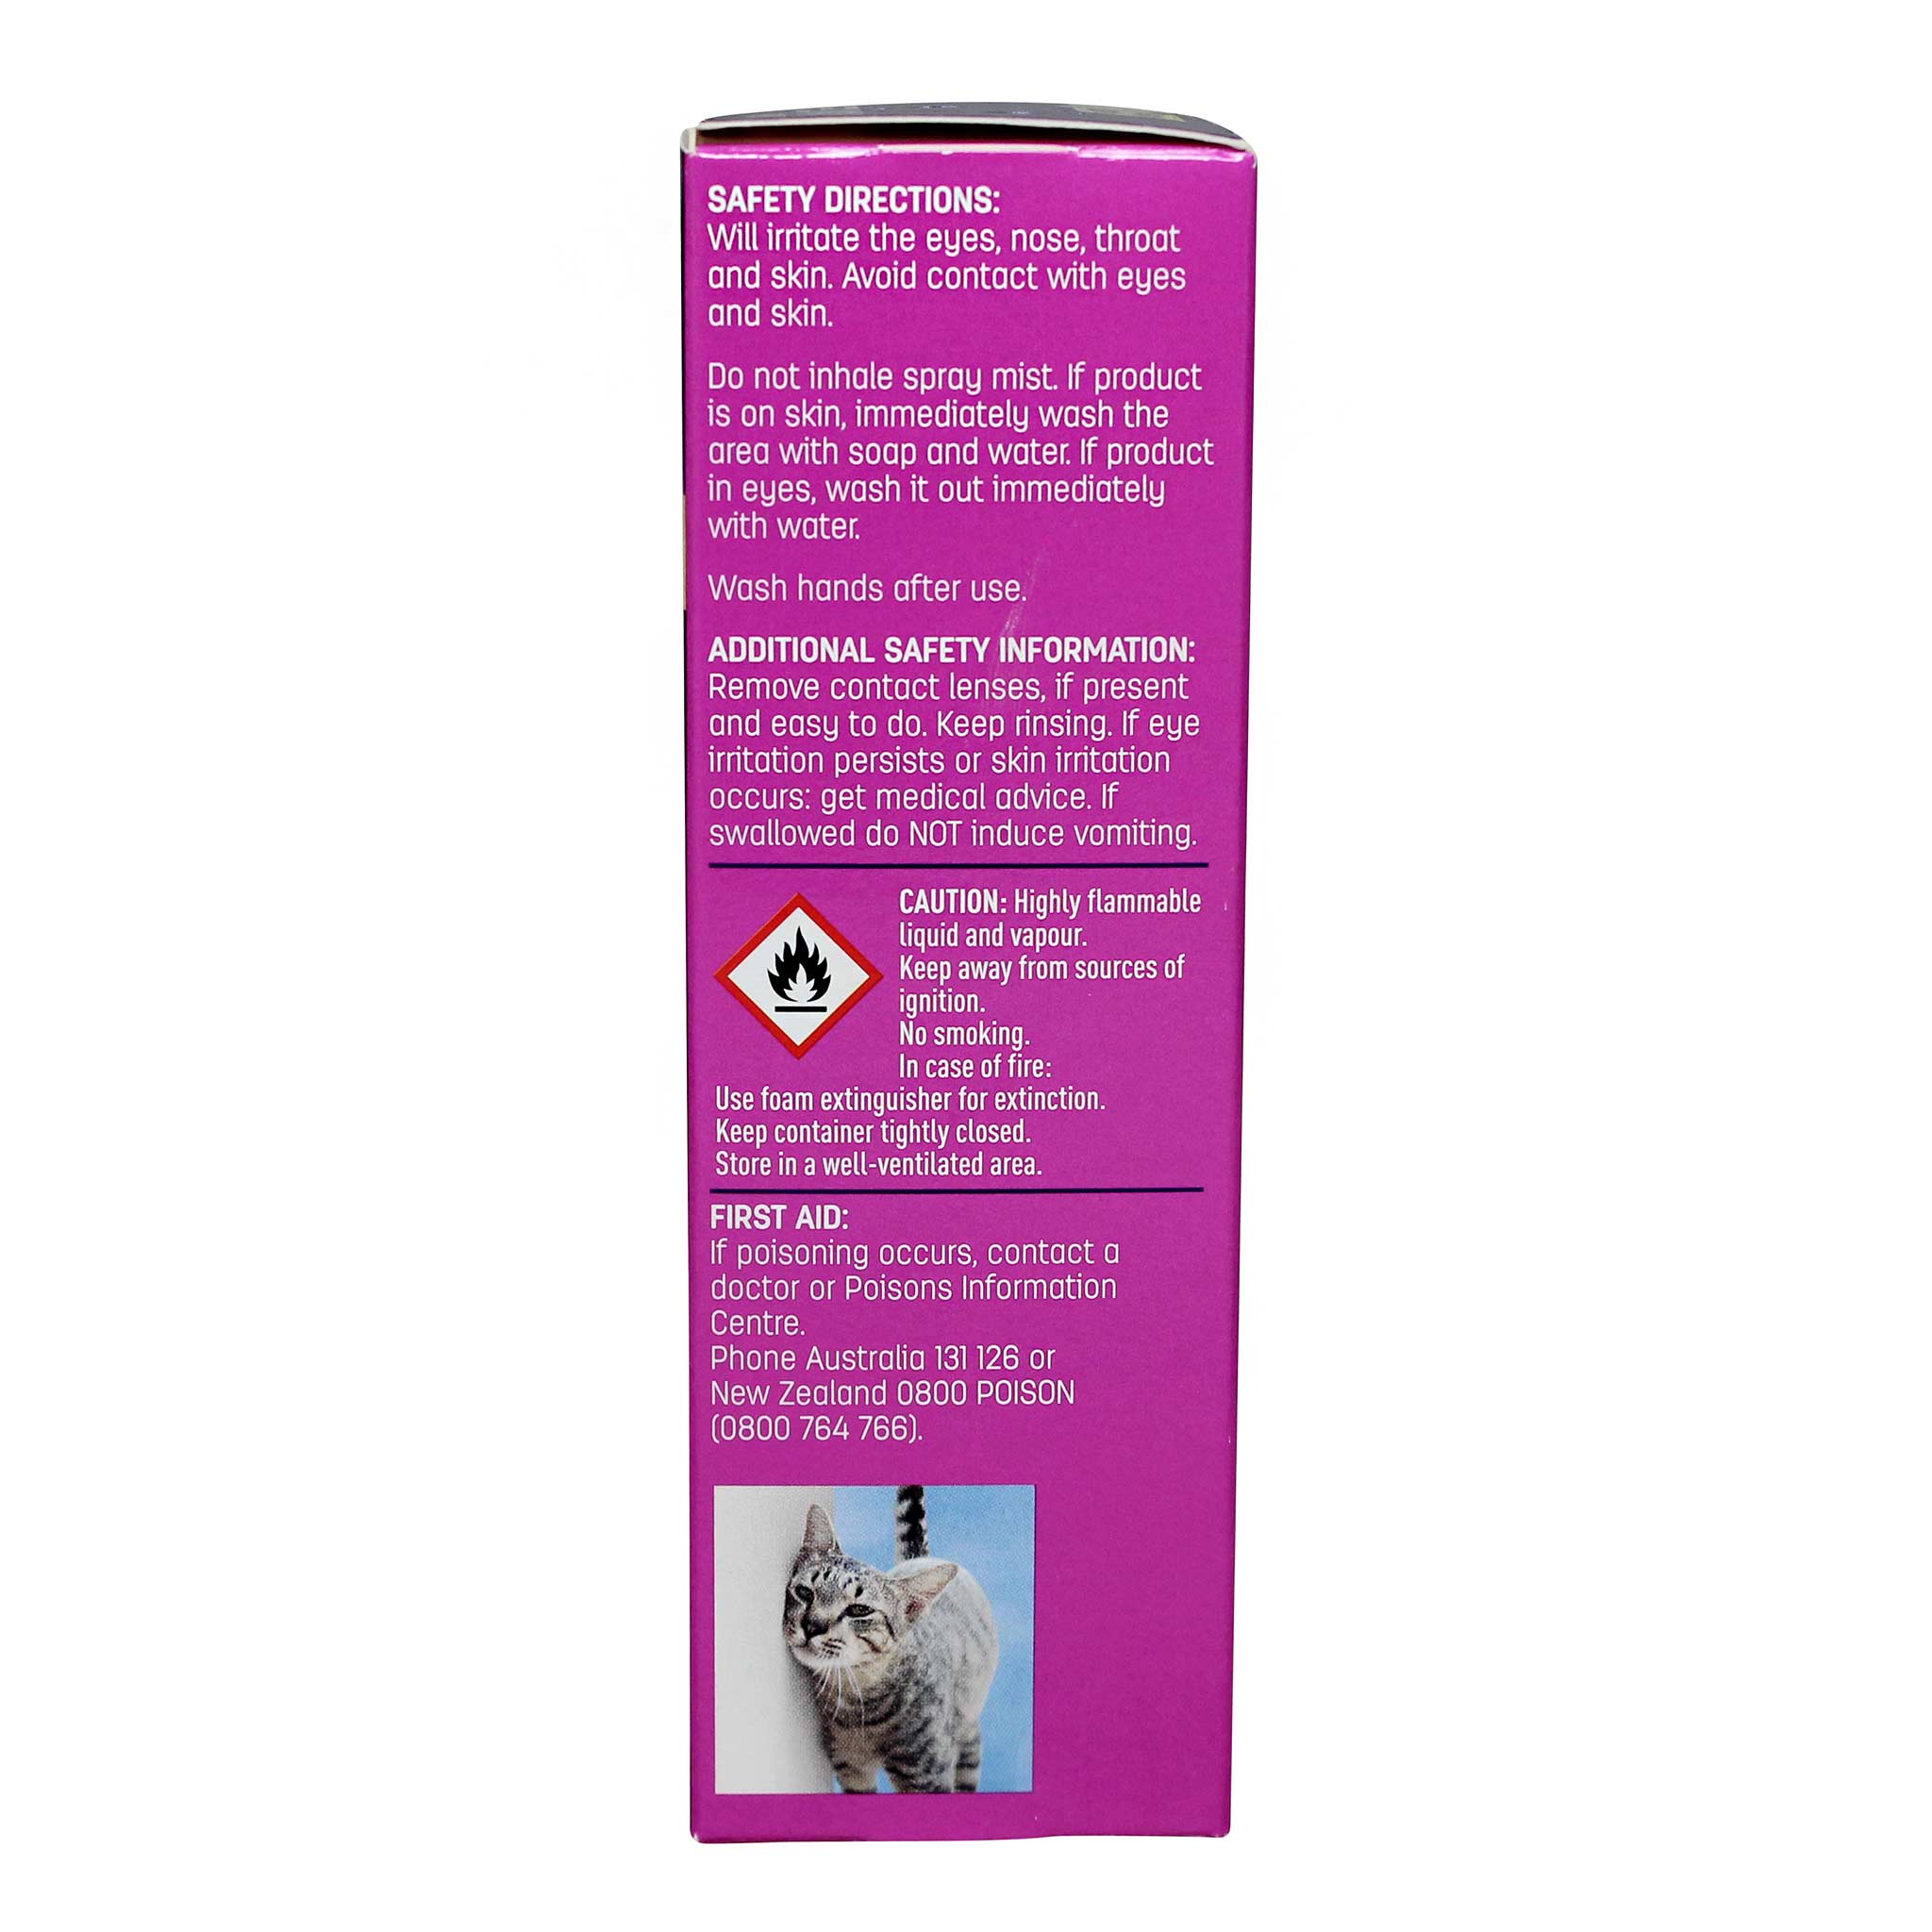 FELIWAY Classic Spray for Cats 60 ml